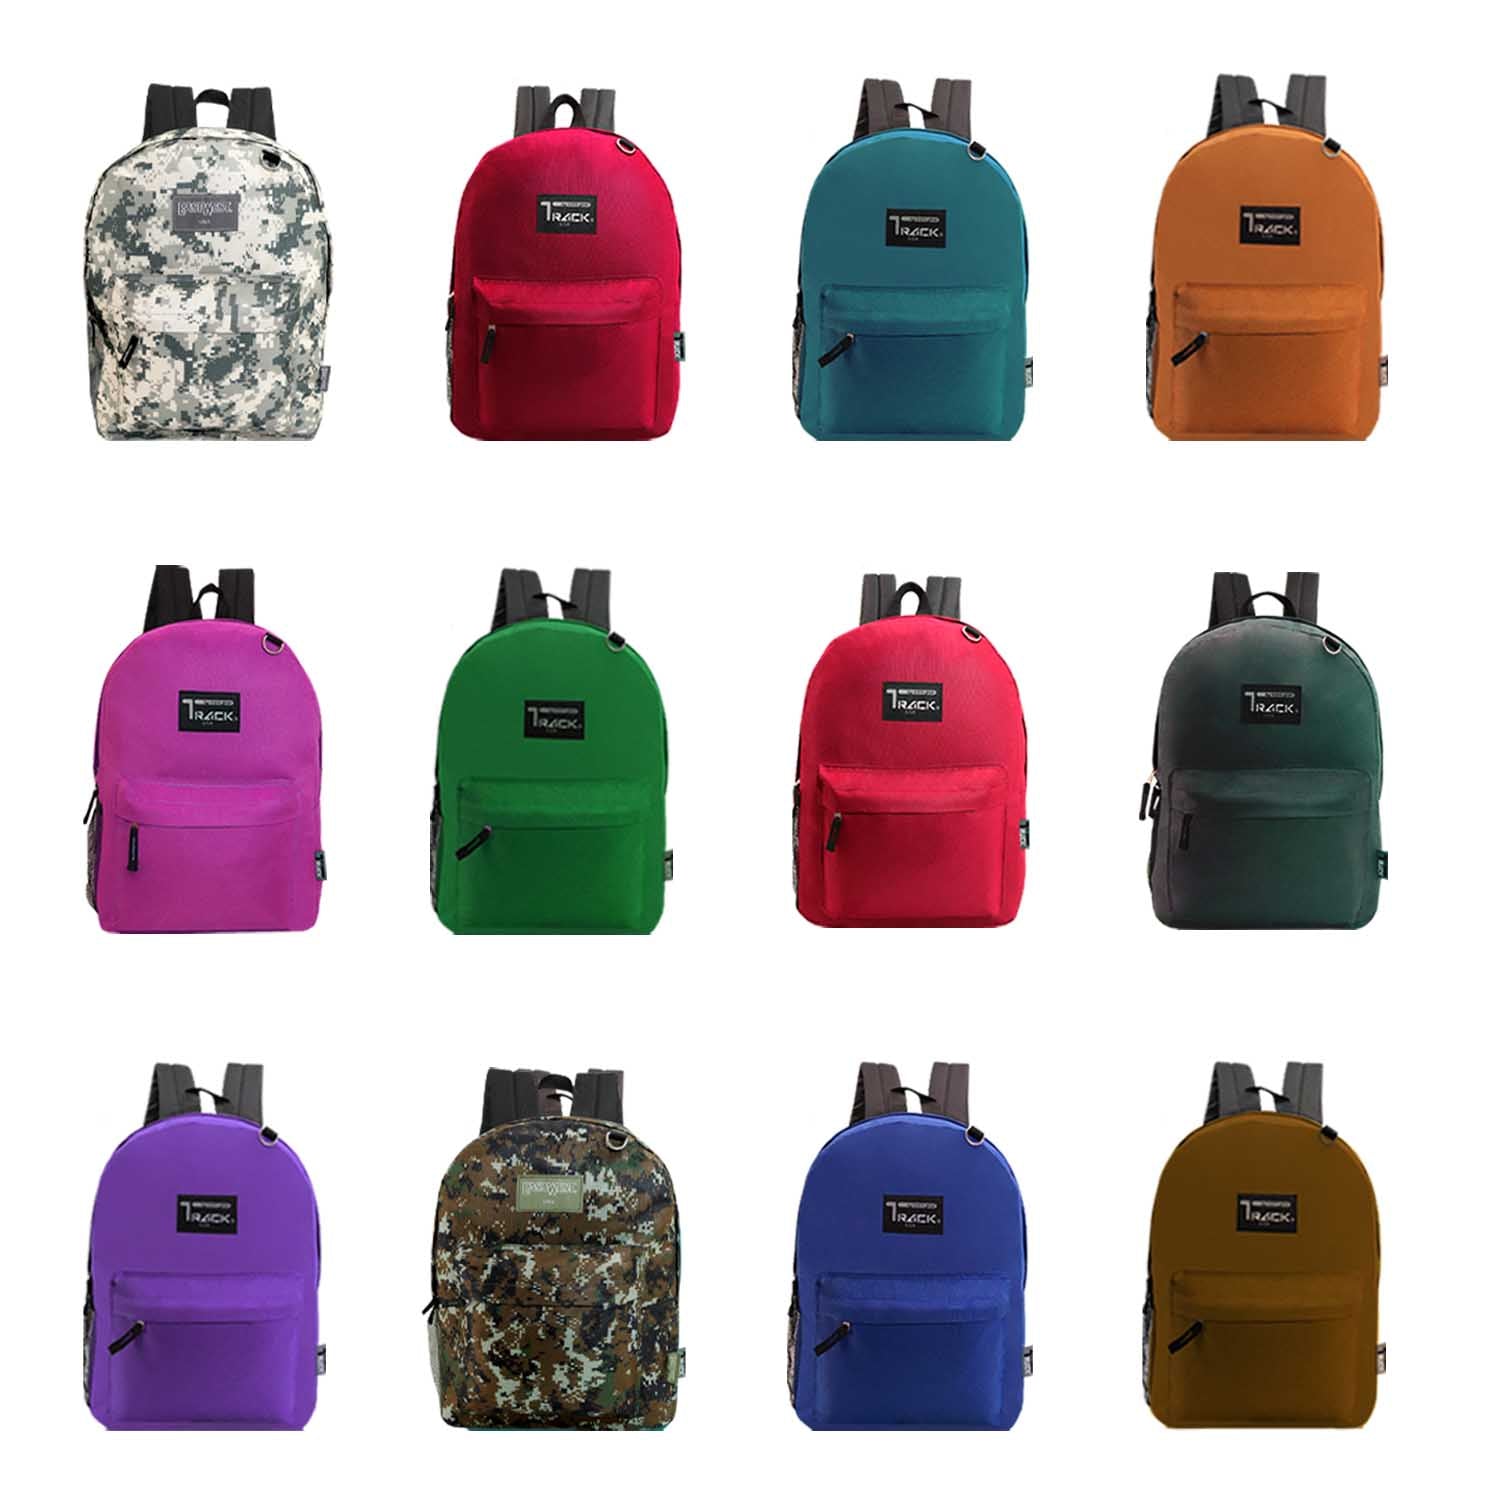 17" Kids Wholesale Backpacks - Assorted Colors and Prints, Wholesale Case of 24 Bookbags